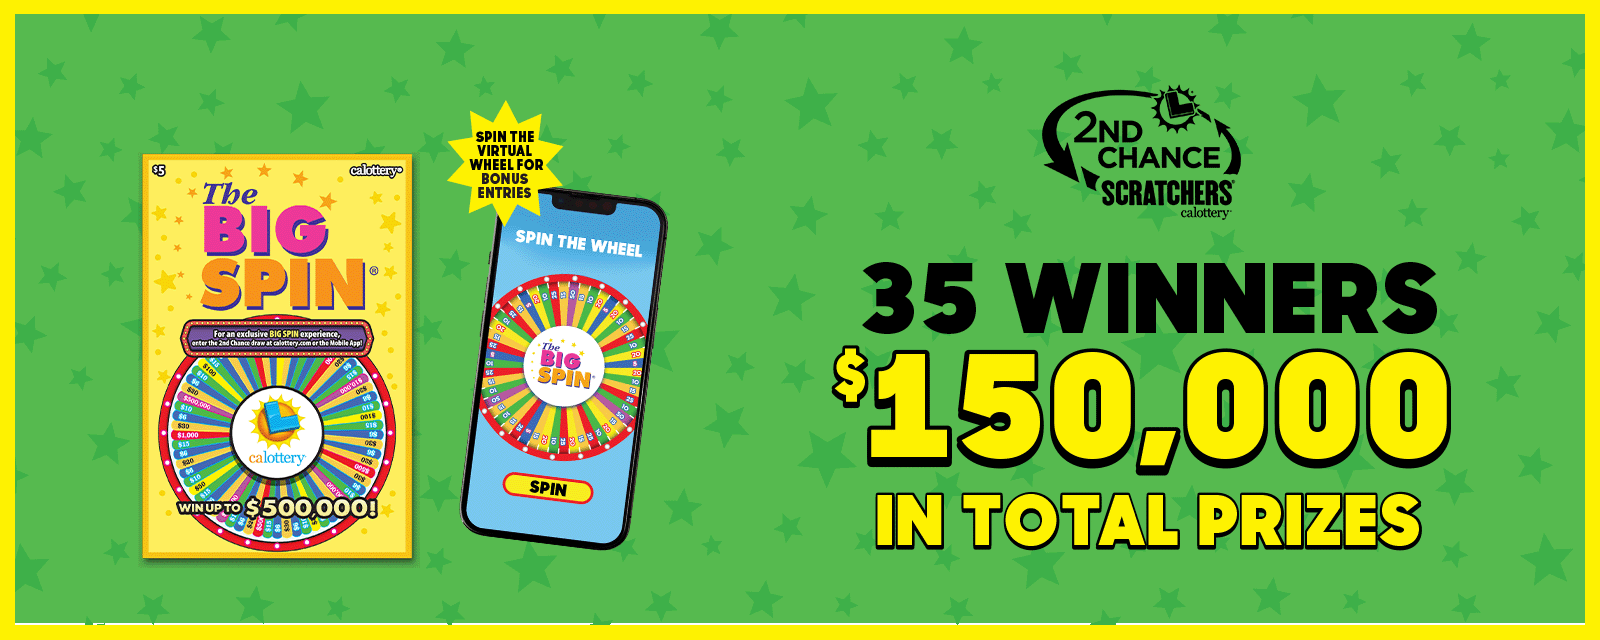 Spin The Virtual Wheel For Bonus Entries and 35 Winners, $150,000 In Total Prizes